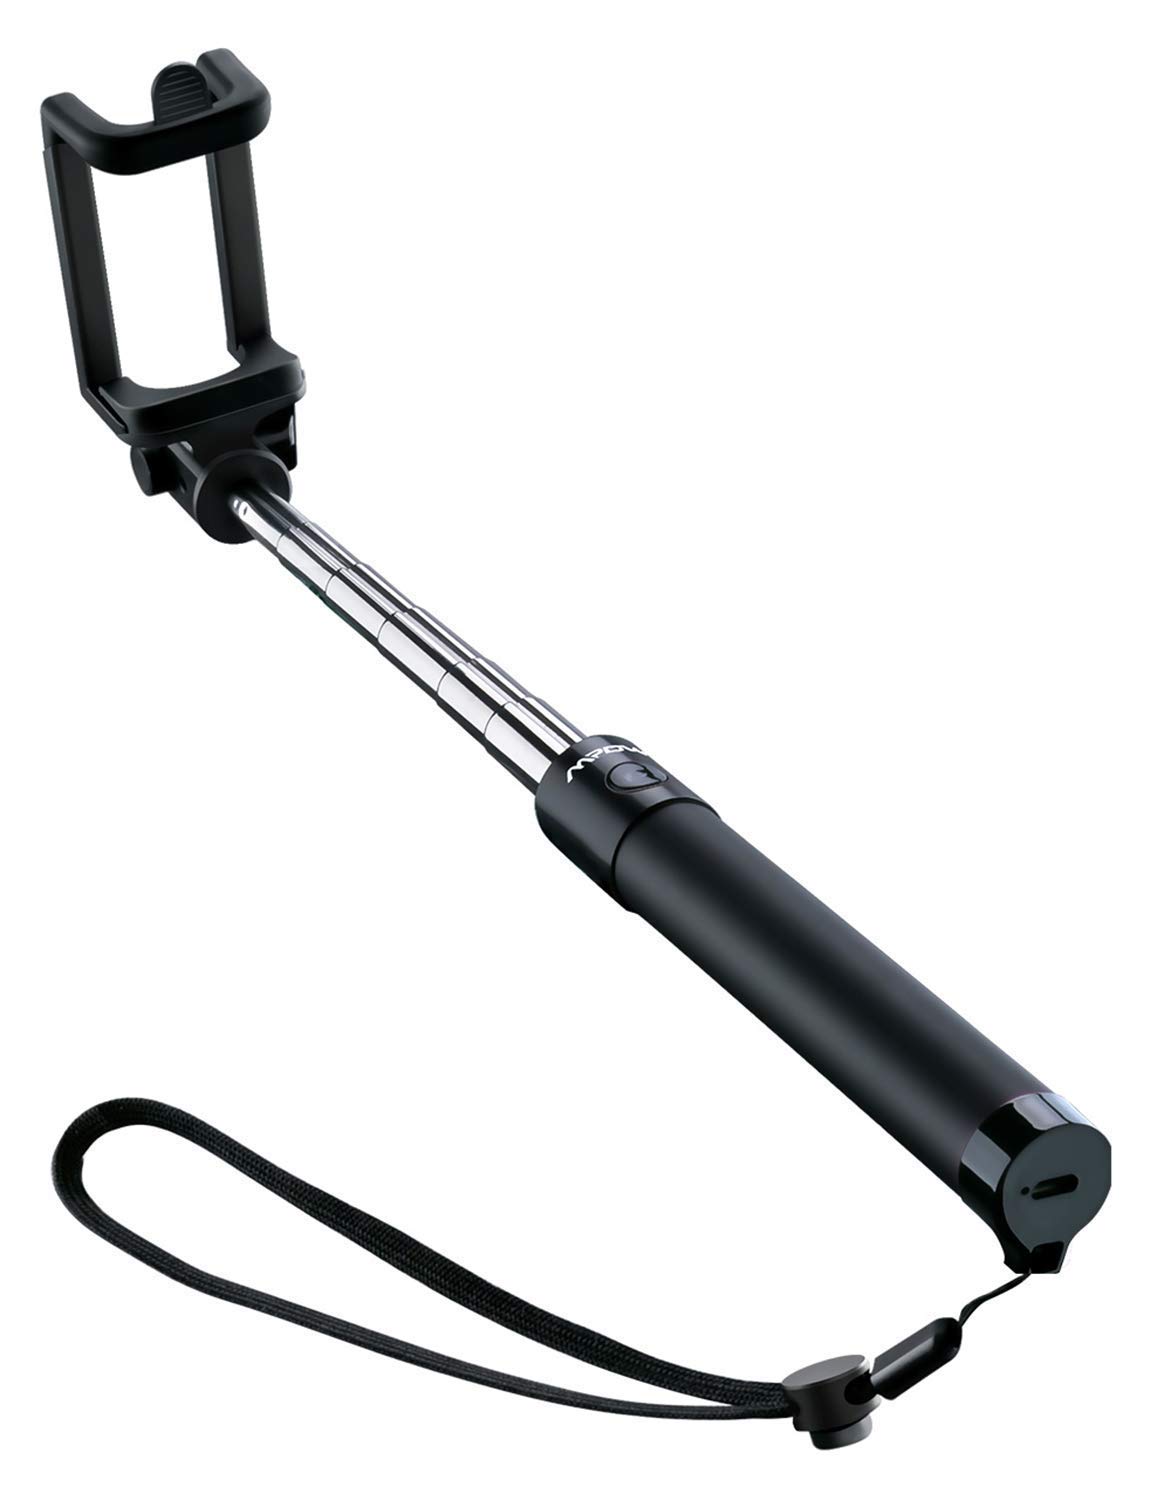 Why Vloggers Prefer Selfie Stick Over Tripods; Amazon Top Tripods and Selfie Sticks 